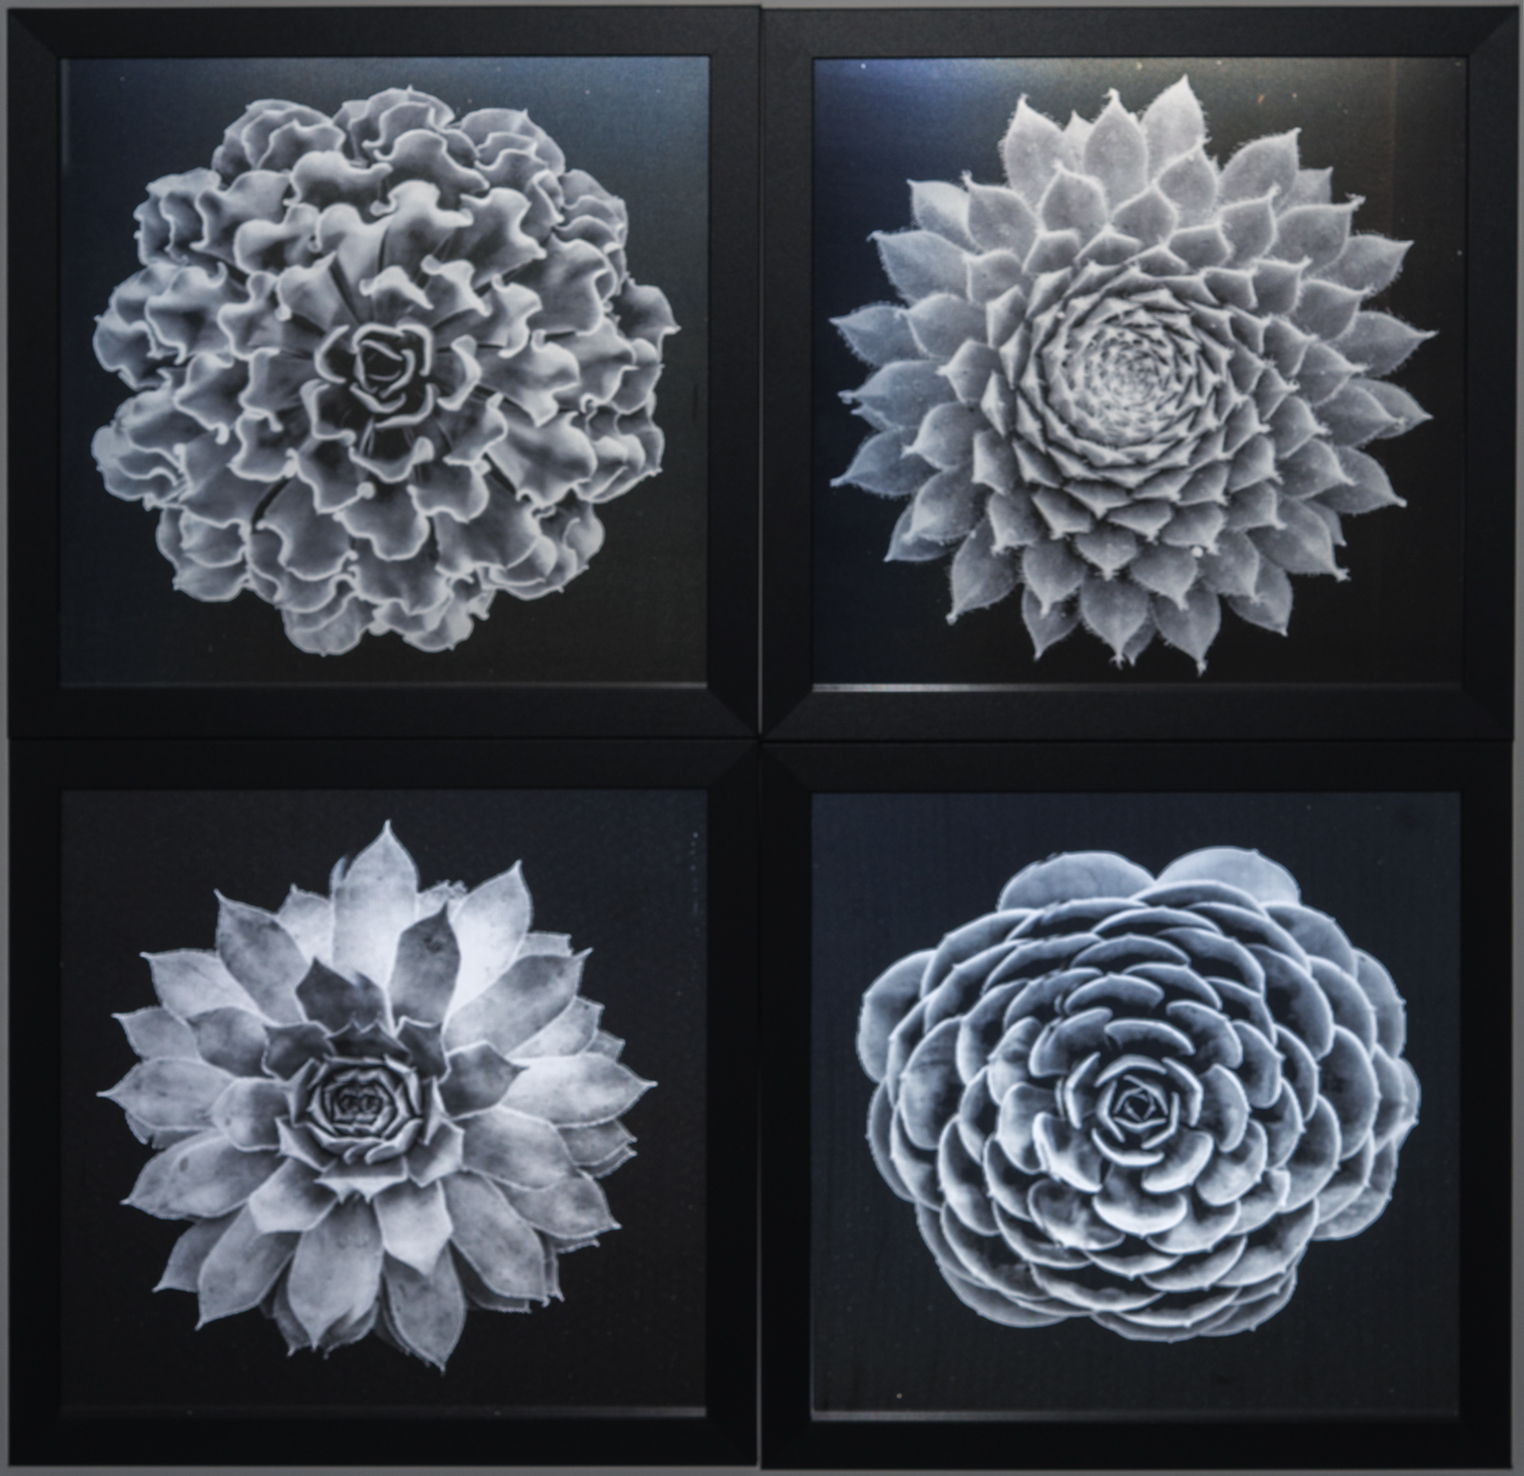 3D Botanical Studies continue at the 3D-Industrial-Complex by Mark ...